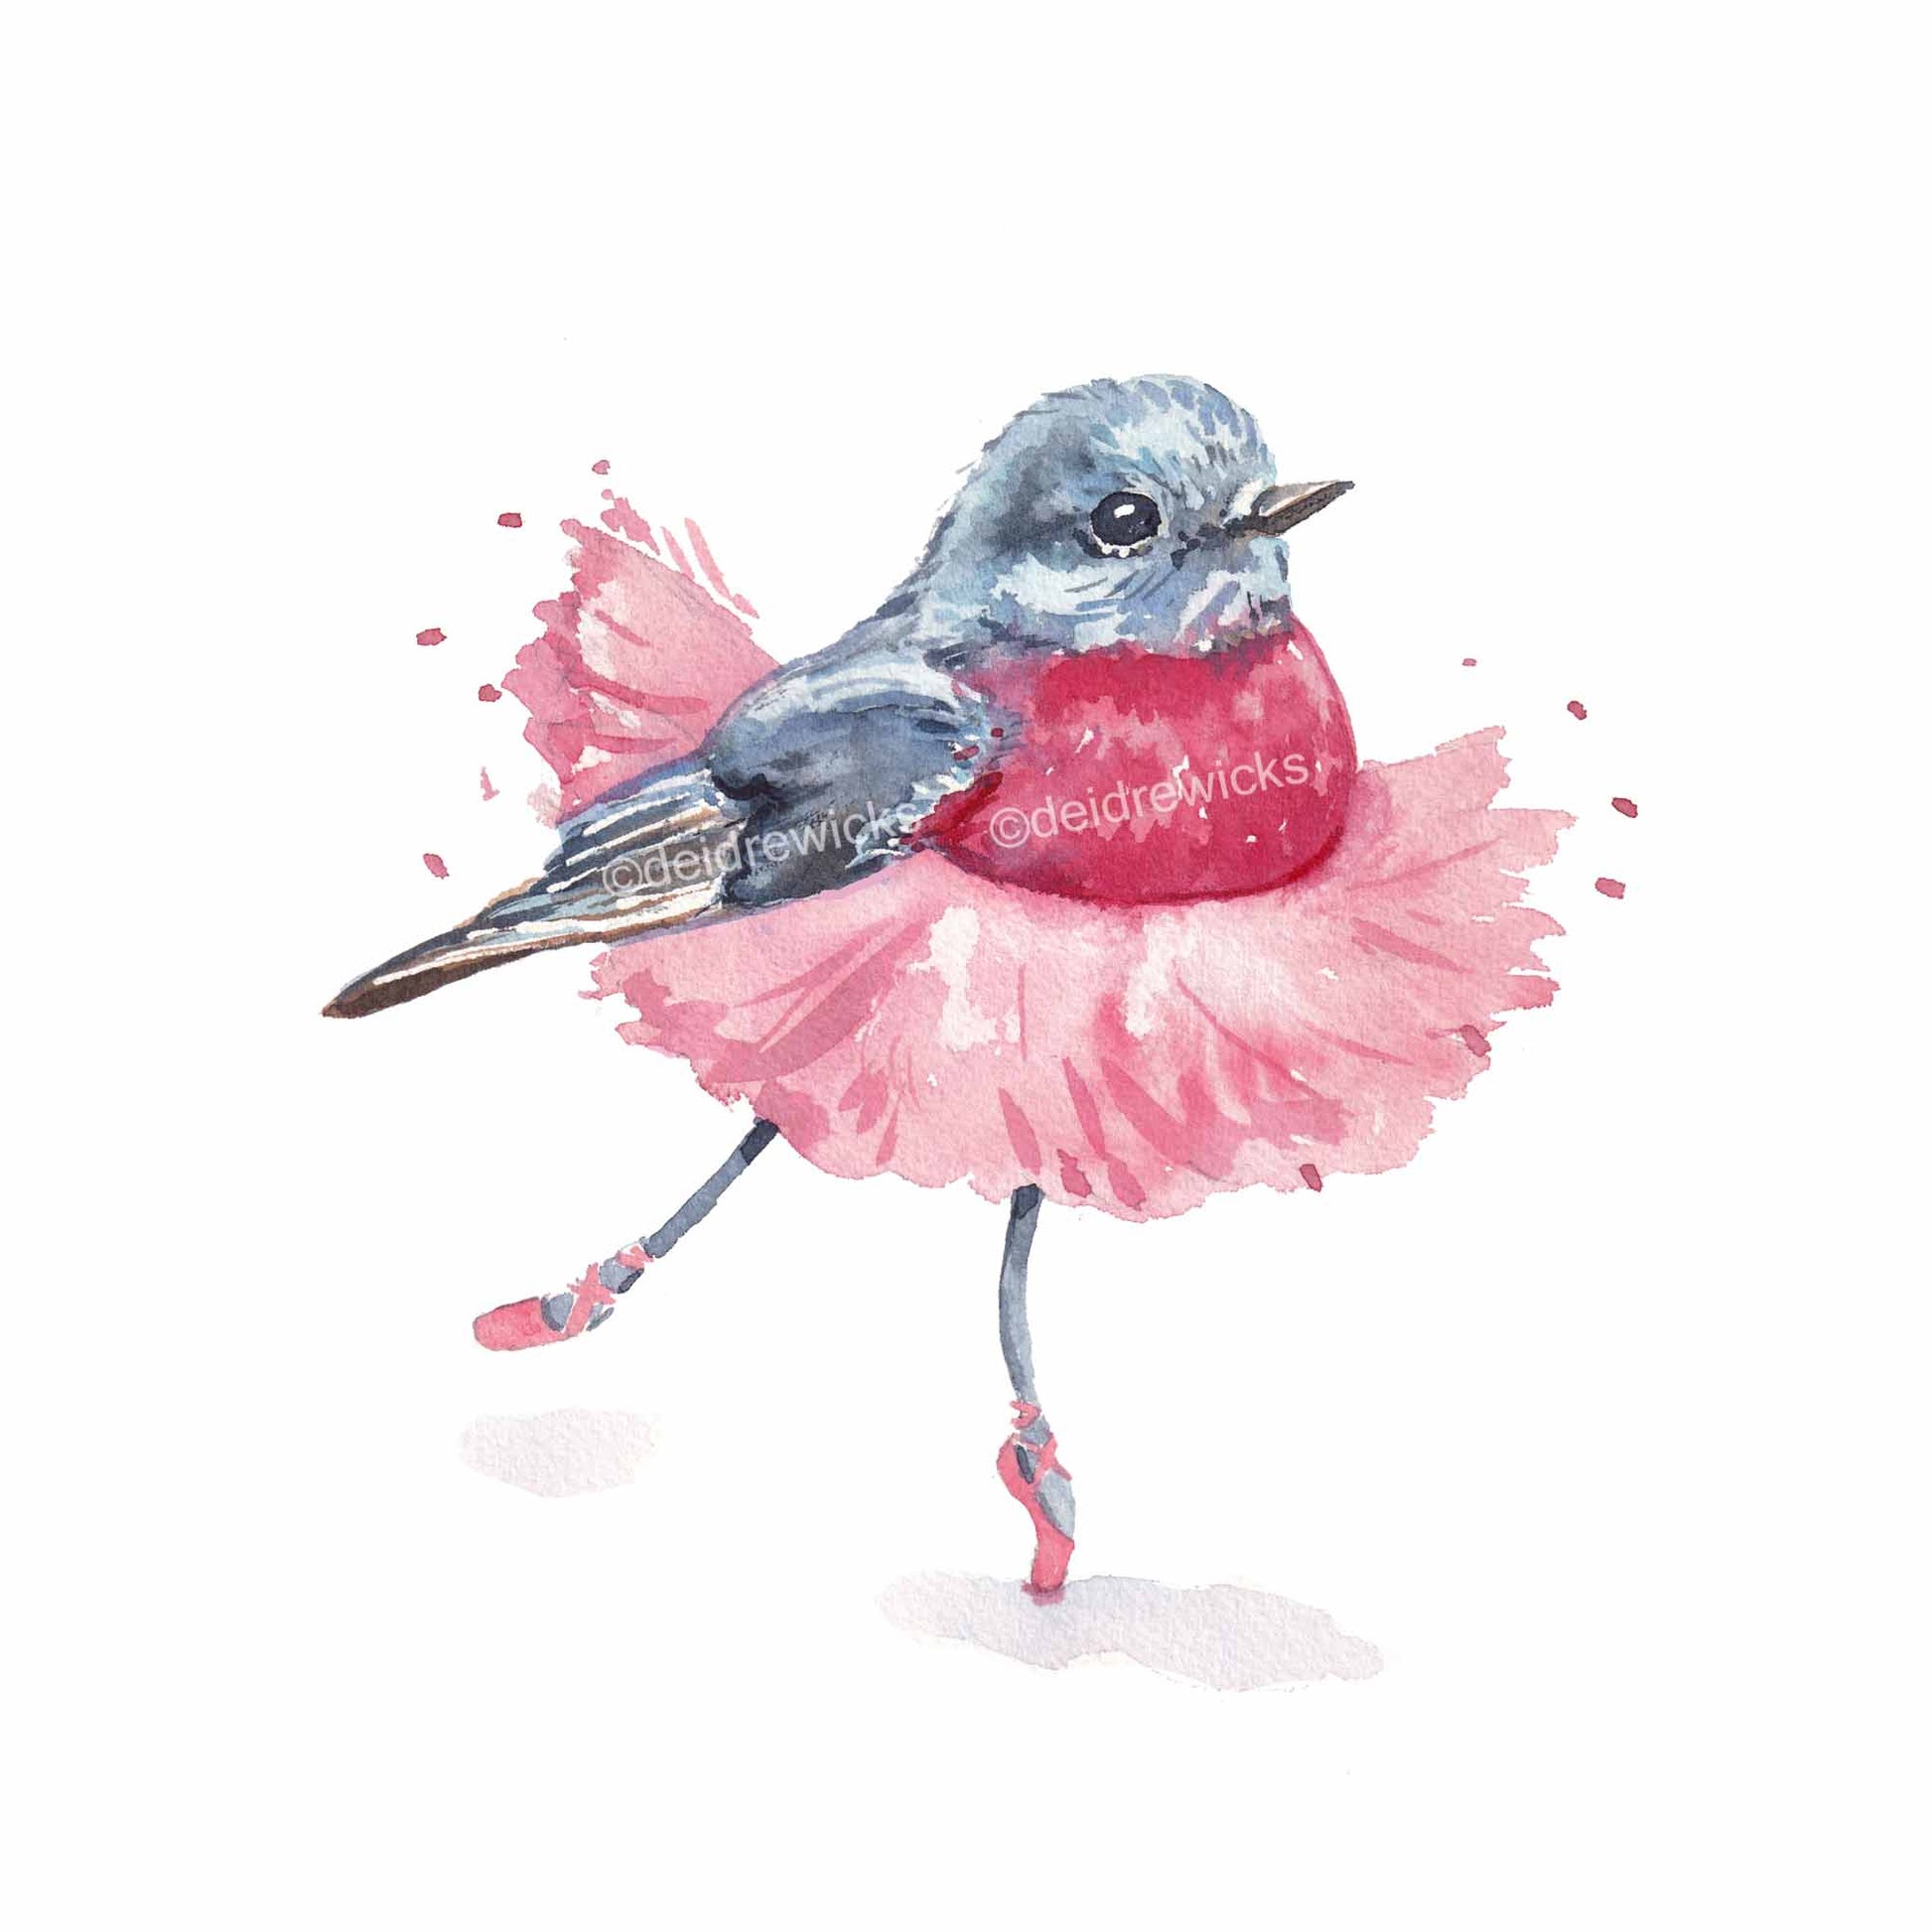 Ballet bird watercolour painting of a rose robin wearing a pink tutu while dancing in pointe shoes. Art by Deidre Wicks